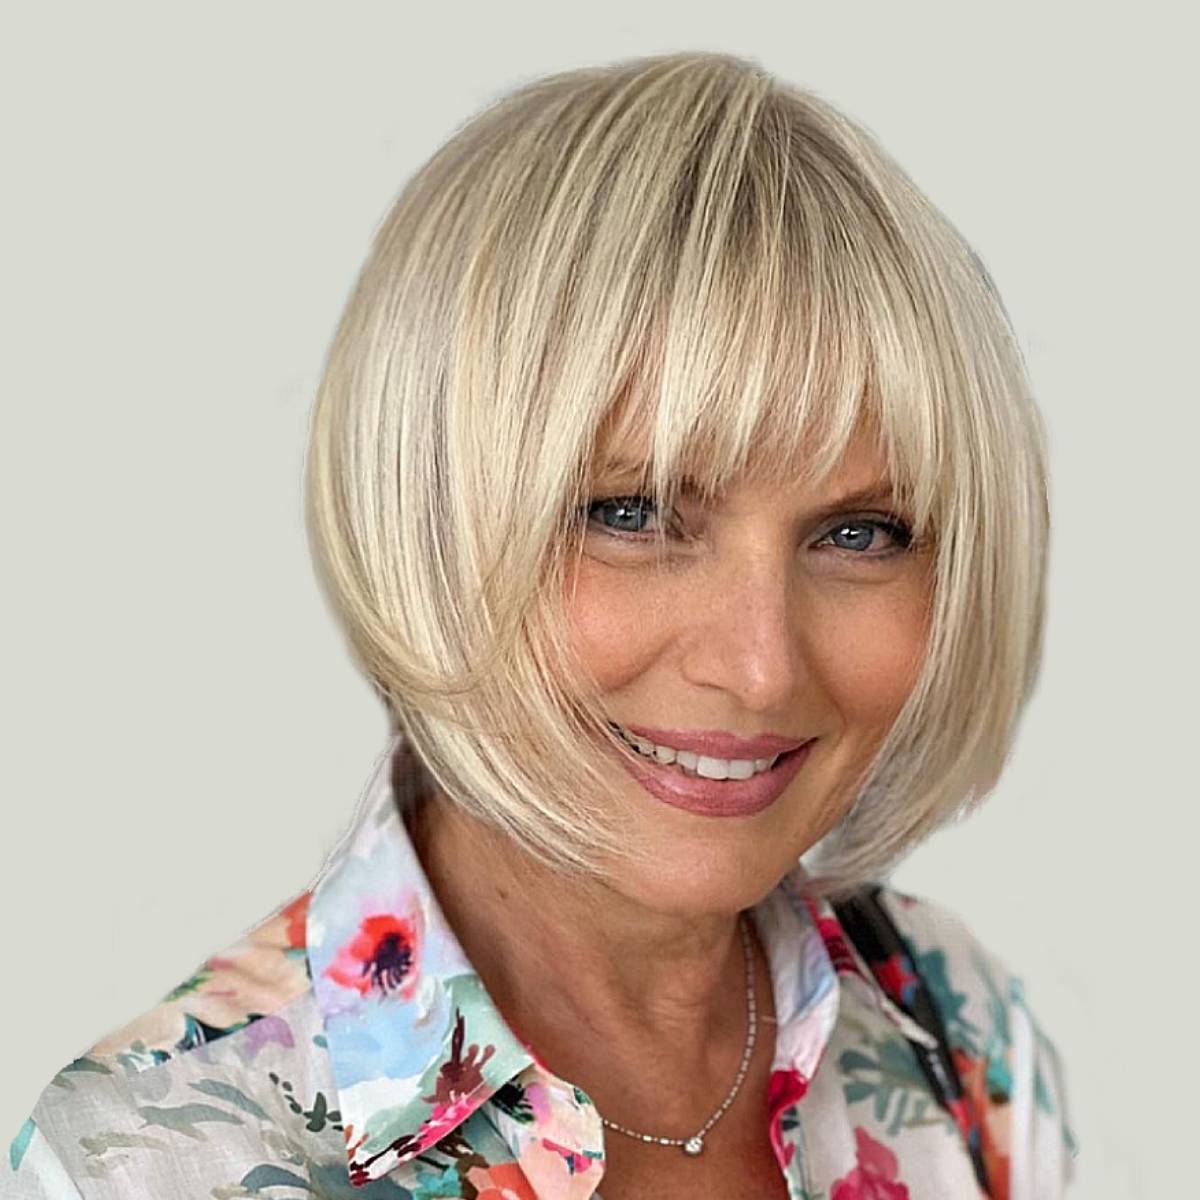 Sassy & Stylish: Top Short Hair Styles For Women Over 50